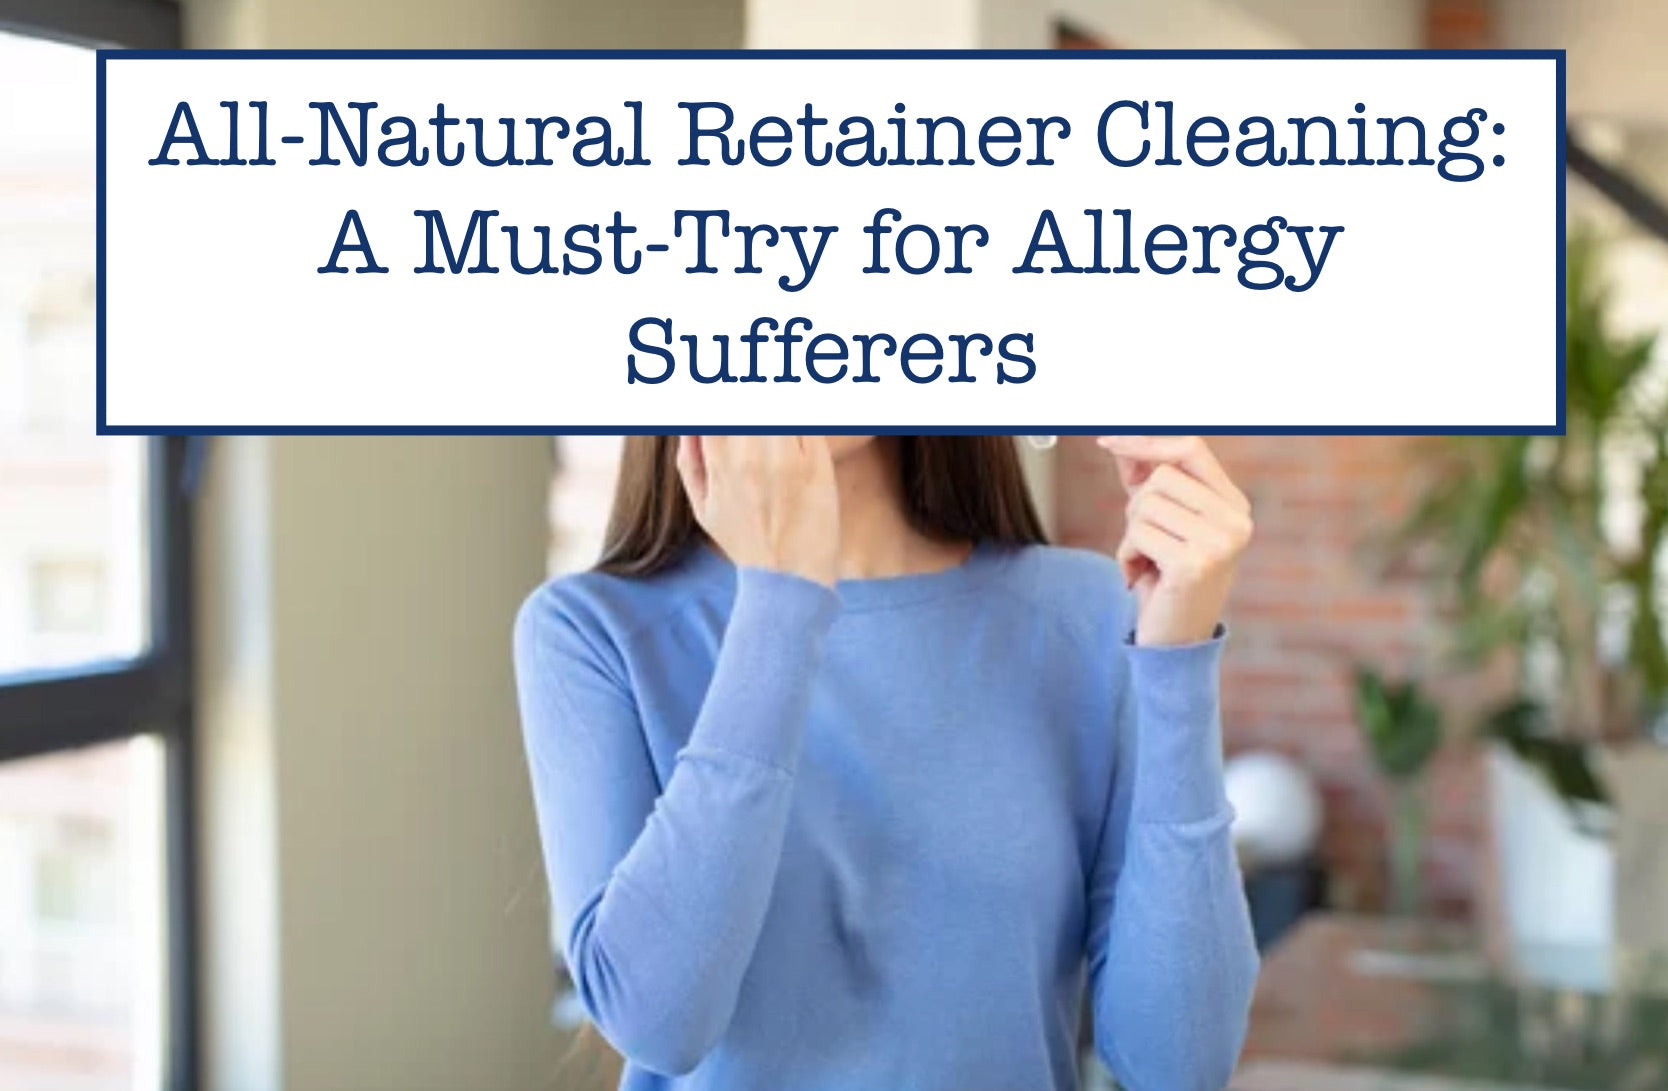 All-Natural Retainer Cleaning: A Must-Try for Allergy Sufferers